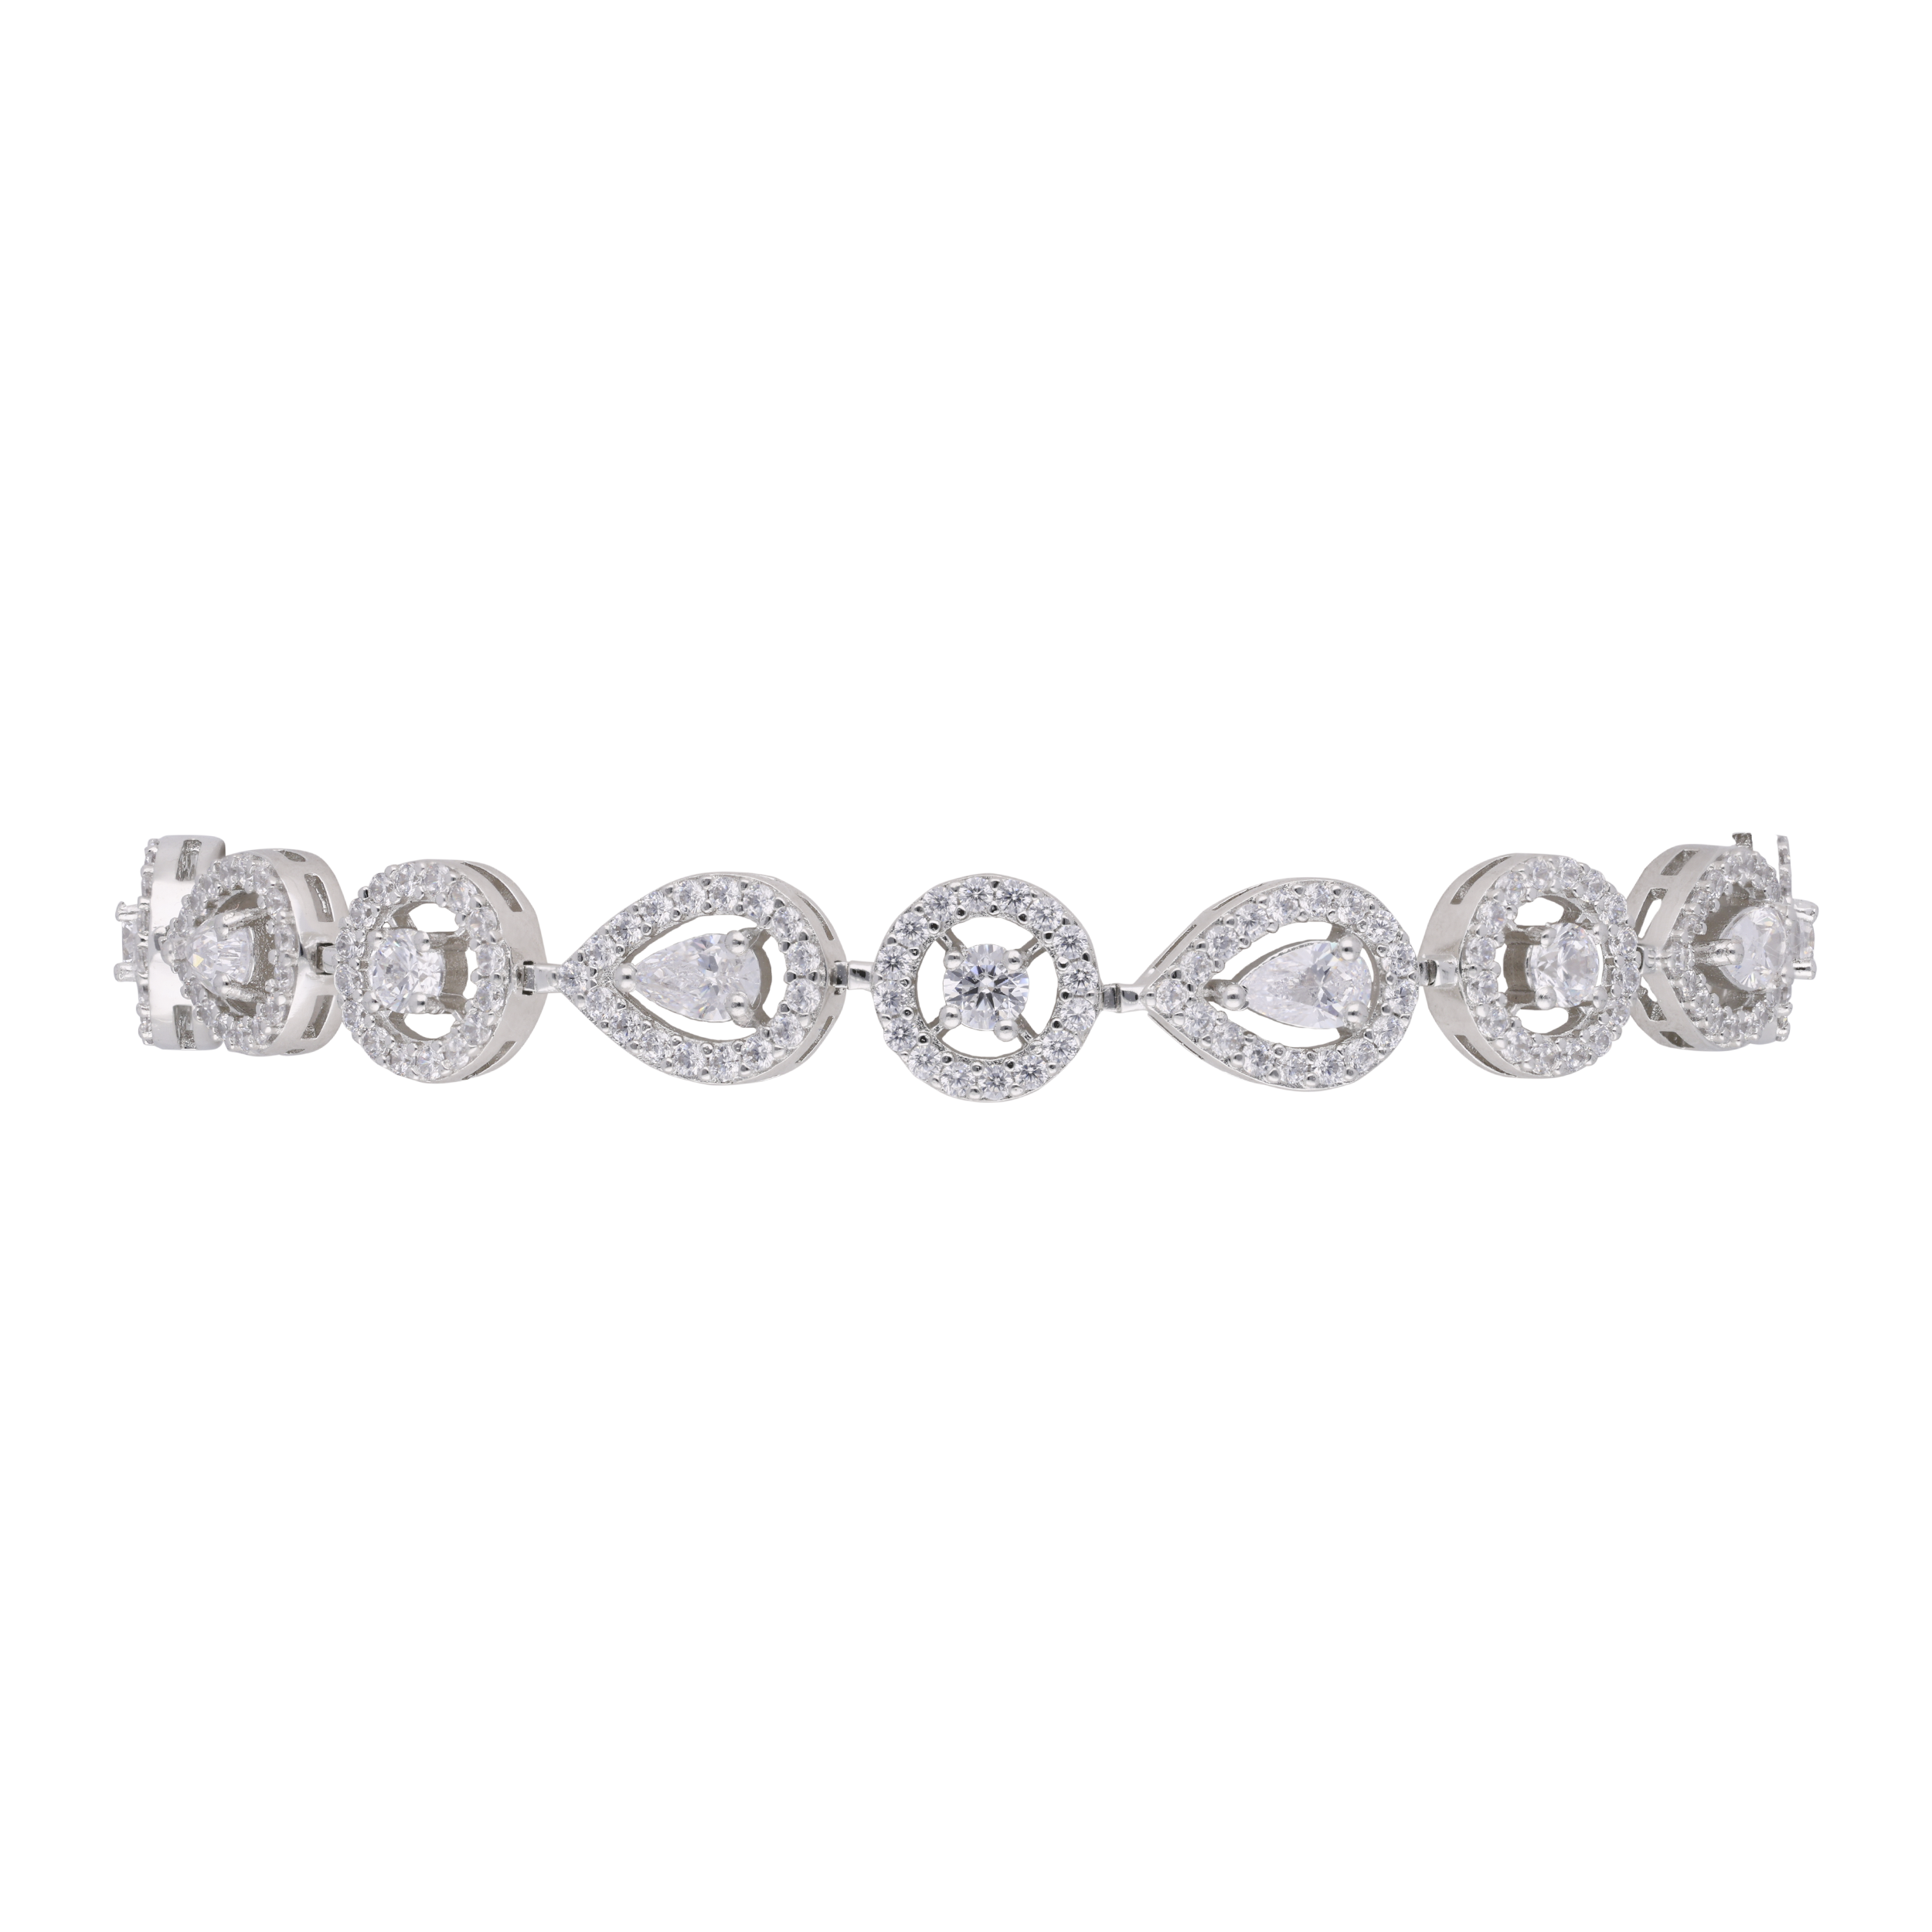 Sterling Silver Flexible Bracelet with Fancy Design and Cubic Zirconia | SKU : 0020289980, 0020289973, 0020289966